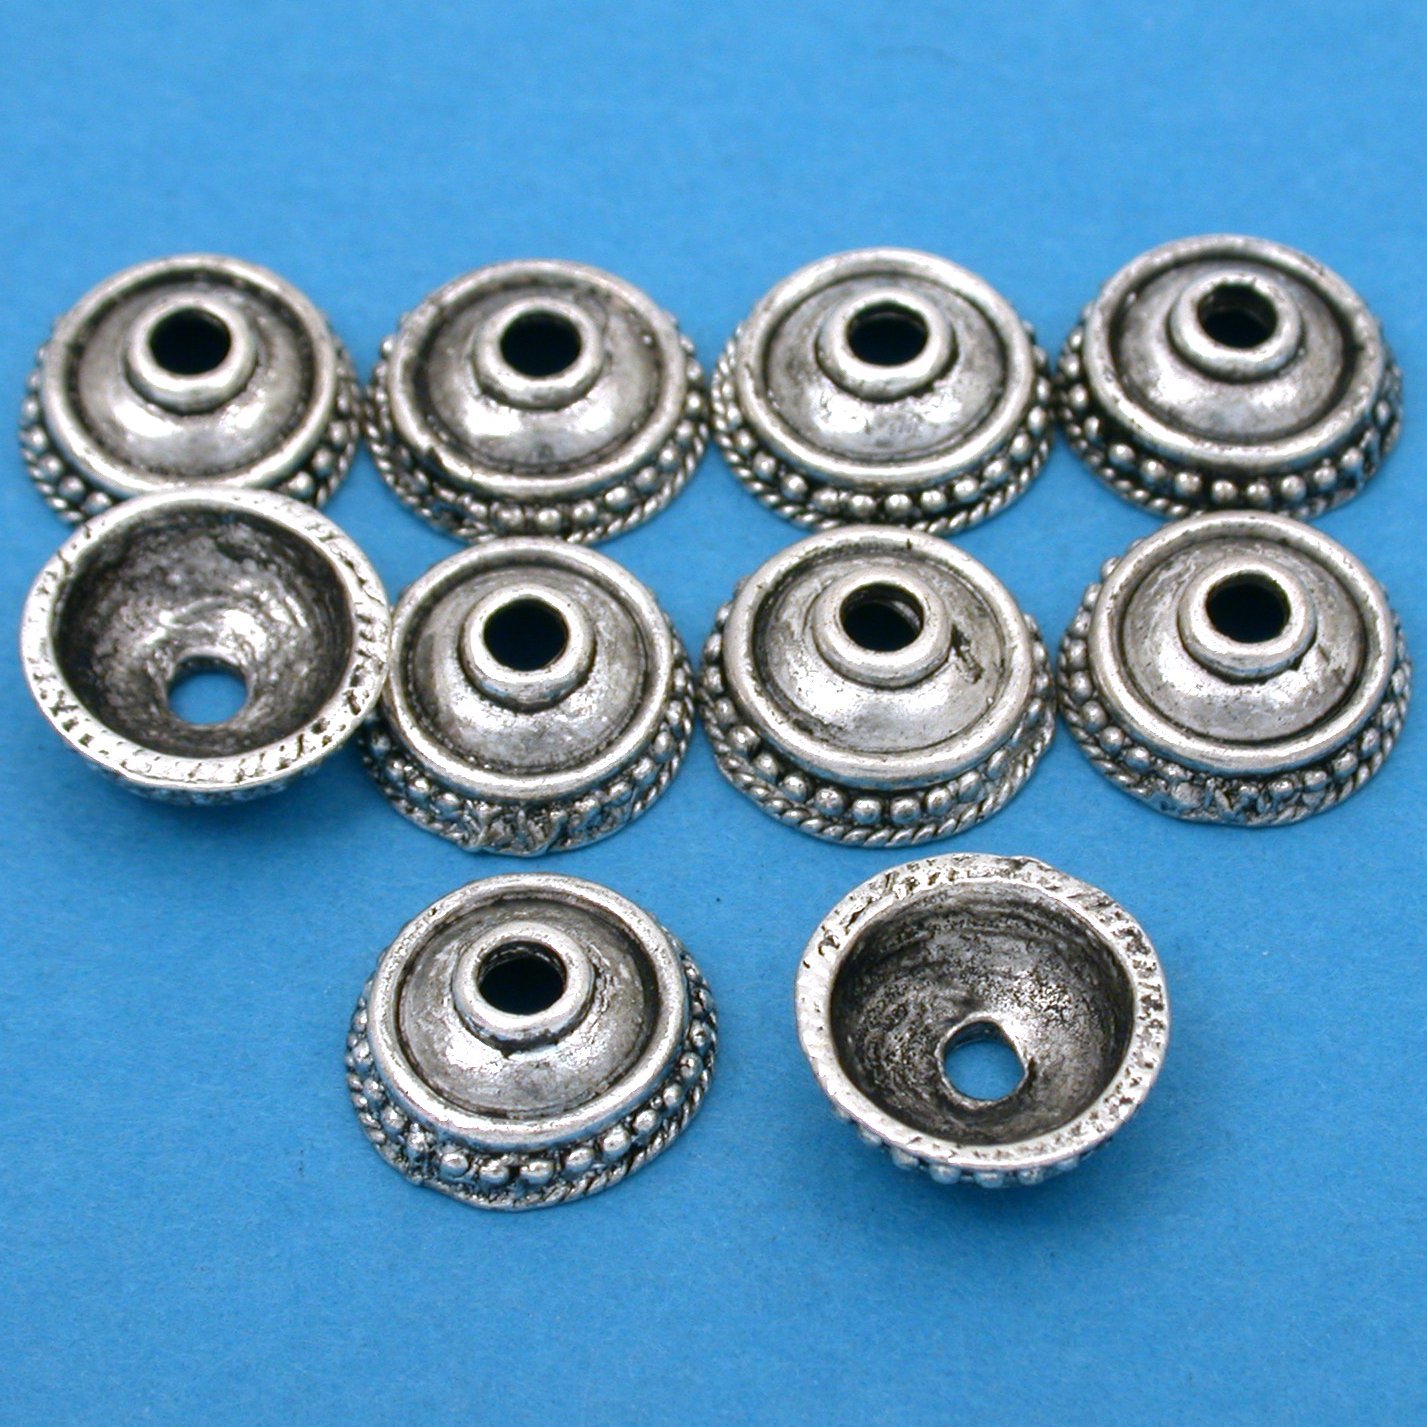 Primary image for Bali Dot Bead Caps Antique Silver Plated 14mm 15 Grams 8Pcs Approx.